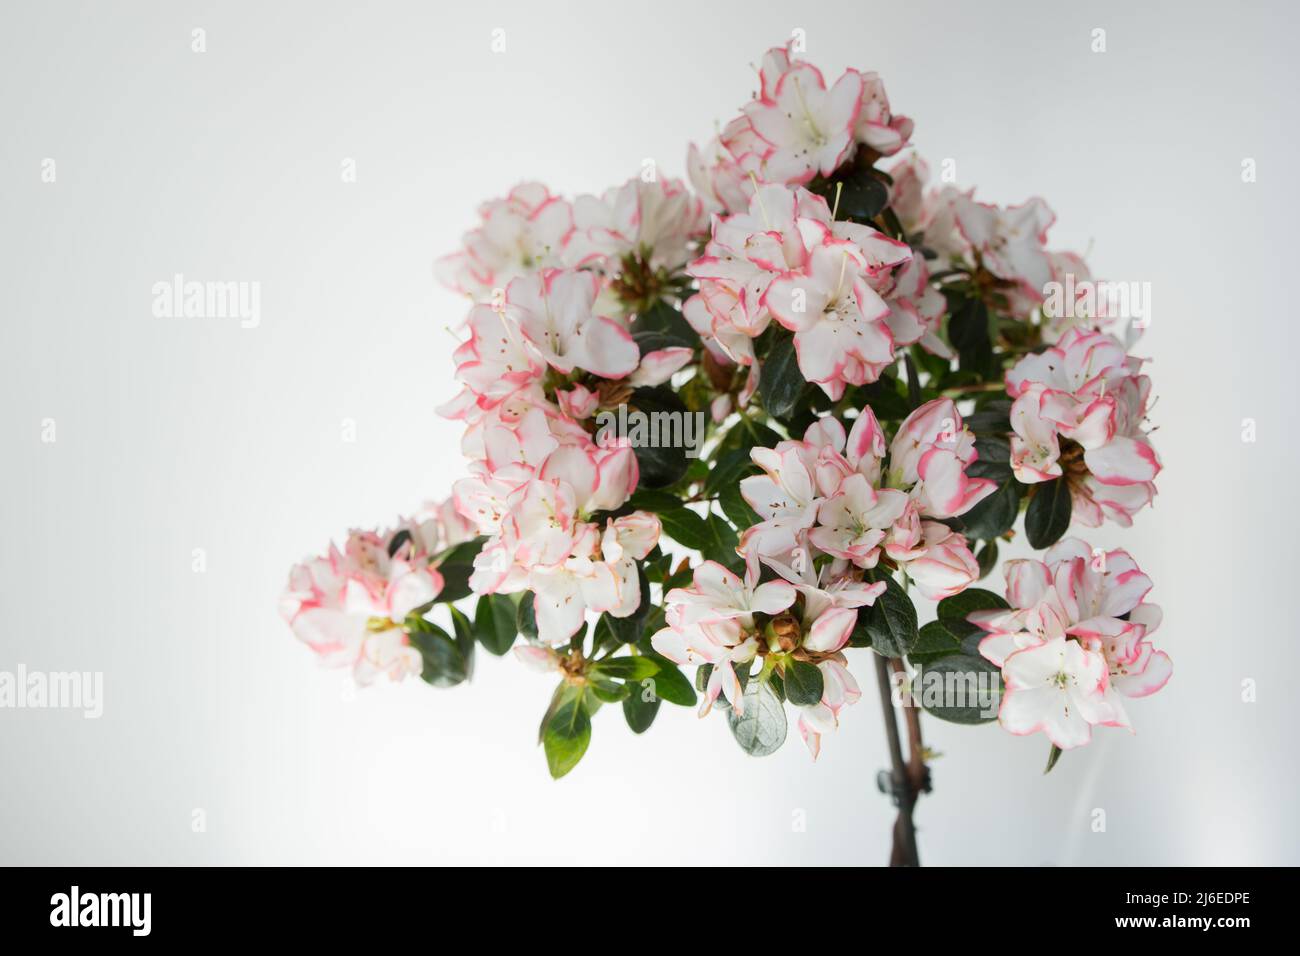 Blooming azalea with pink and white flowers. White background. Azalea is the flower of  Sao Paulo, in Brazil Stock Photo